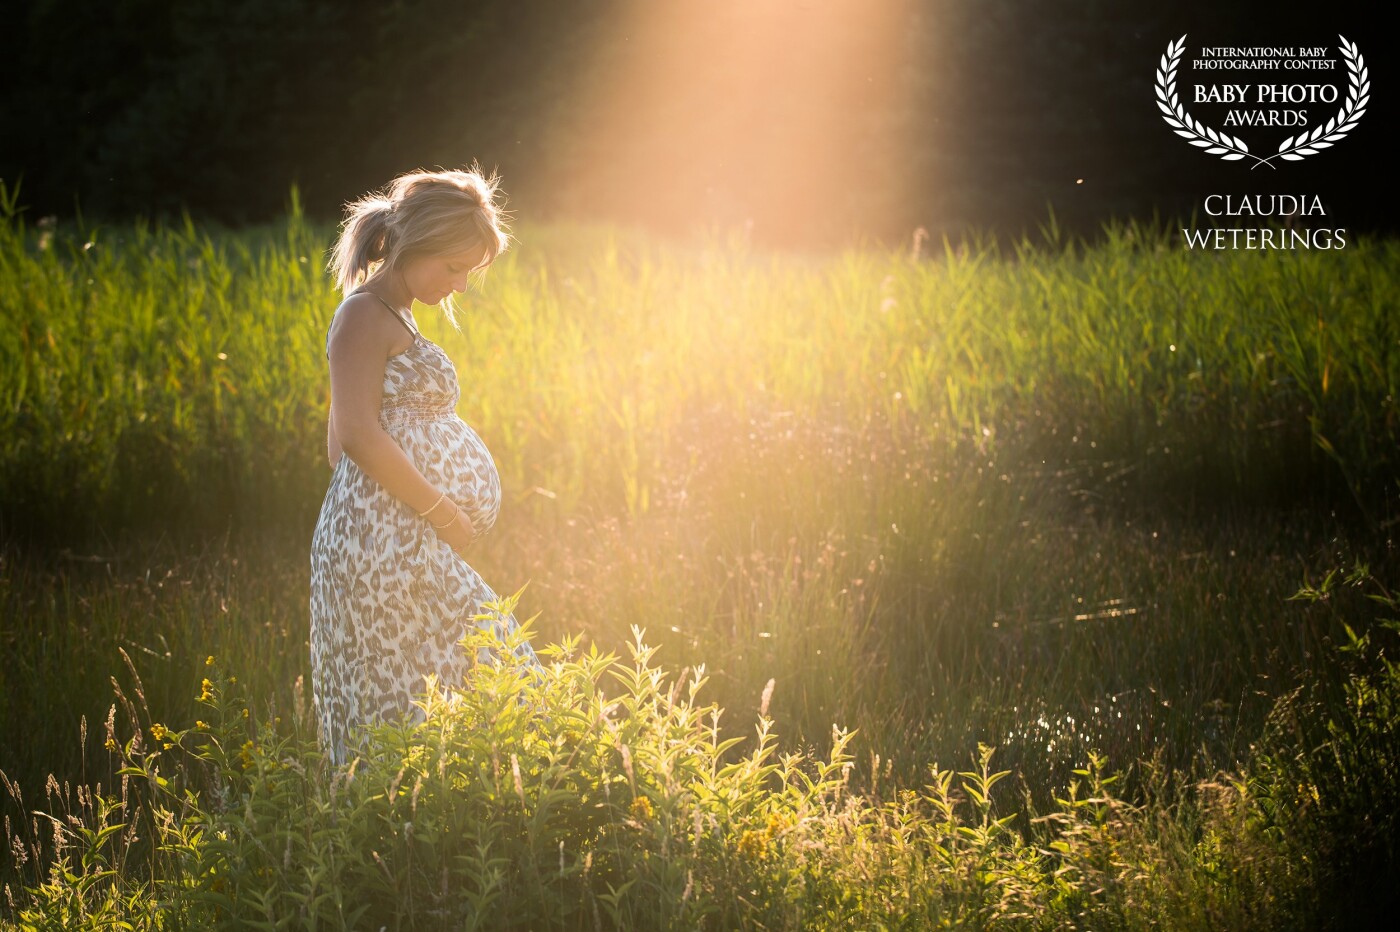 This lovely mommy wanted a special pregnancy shoot outdoors. During the golden hour we made this lovely shot. Later we made some pictures in the water with her also, her first son looking from a distance. The baby brother is born now and has been in our studio already for a newborn session :)